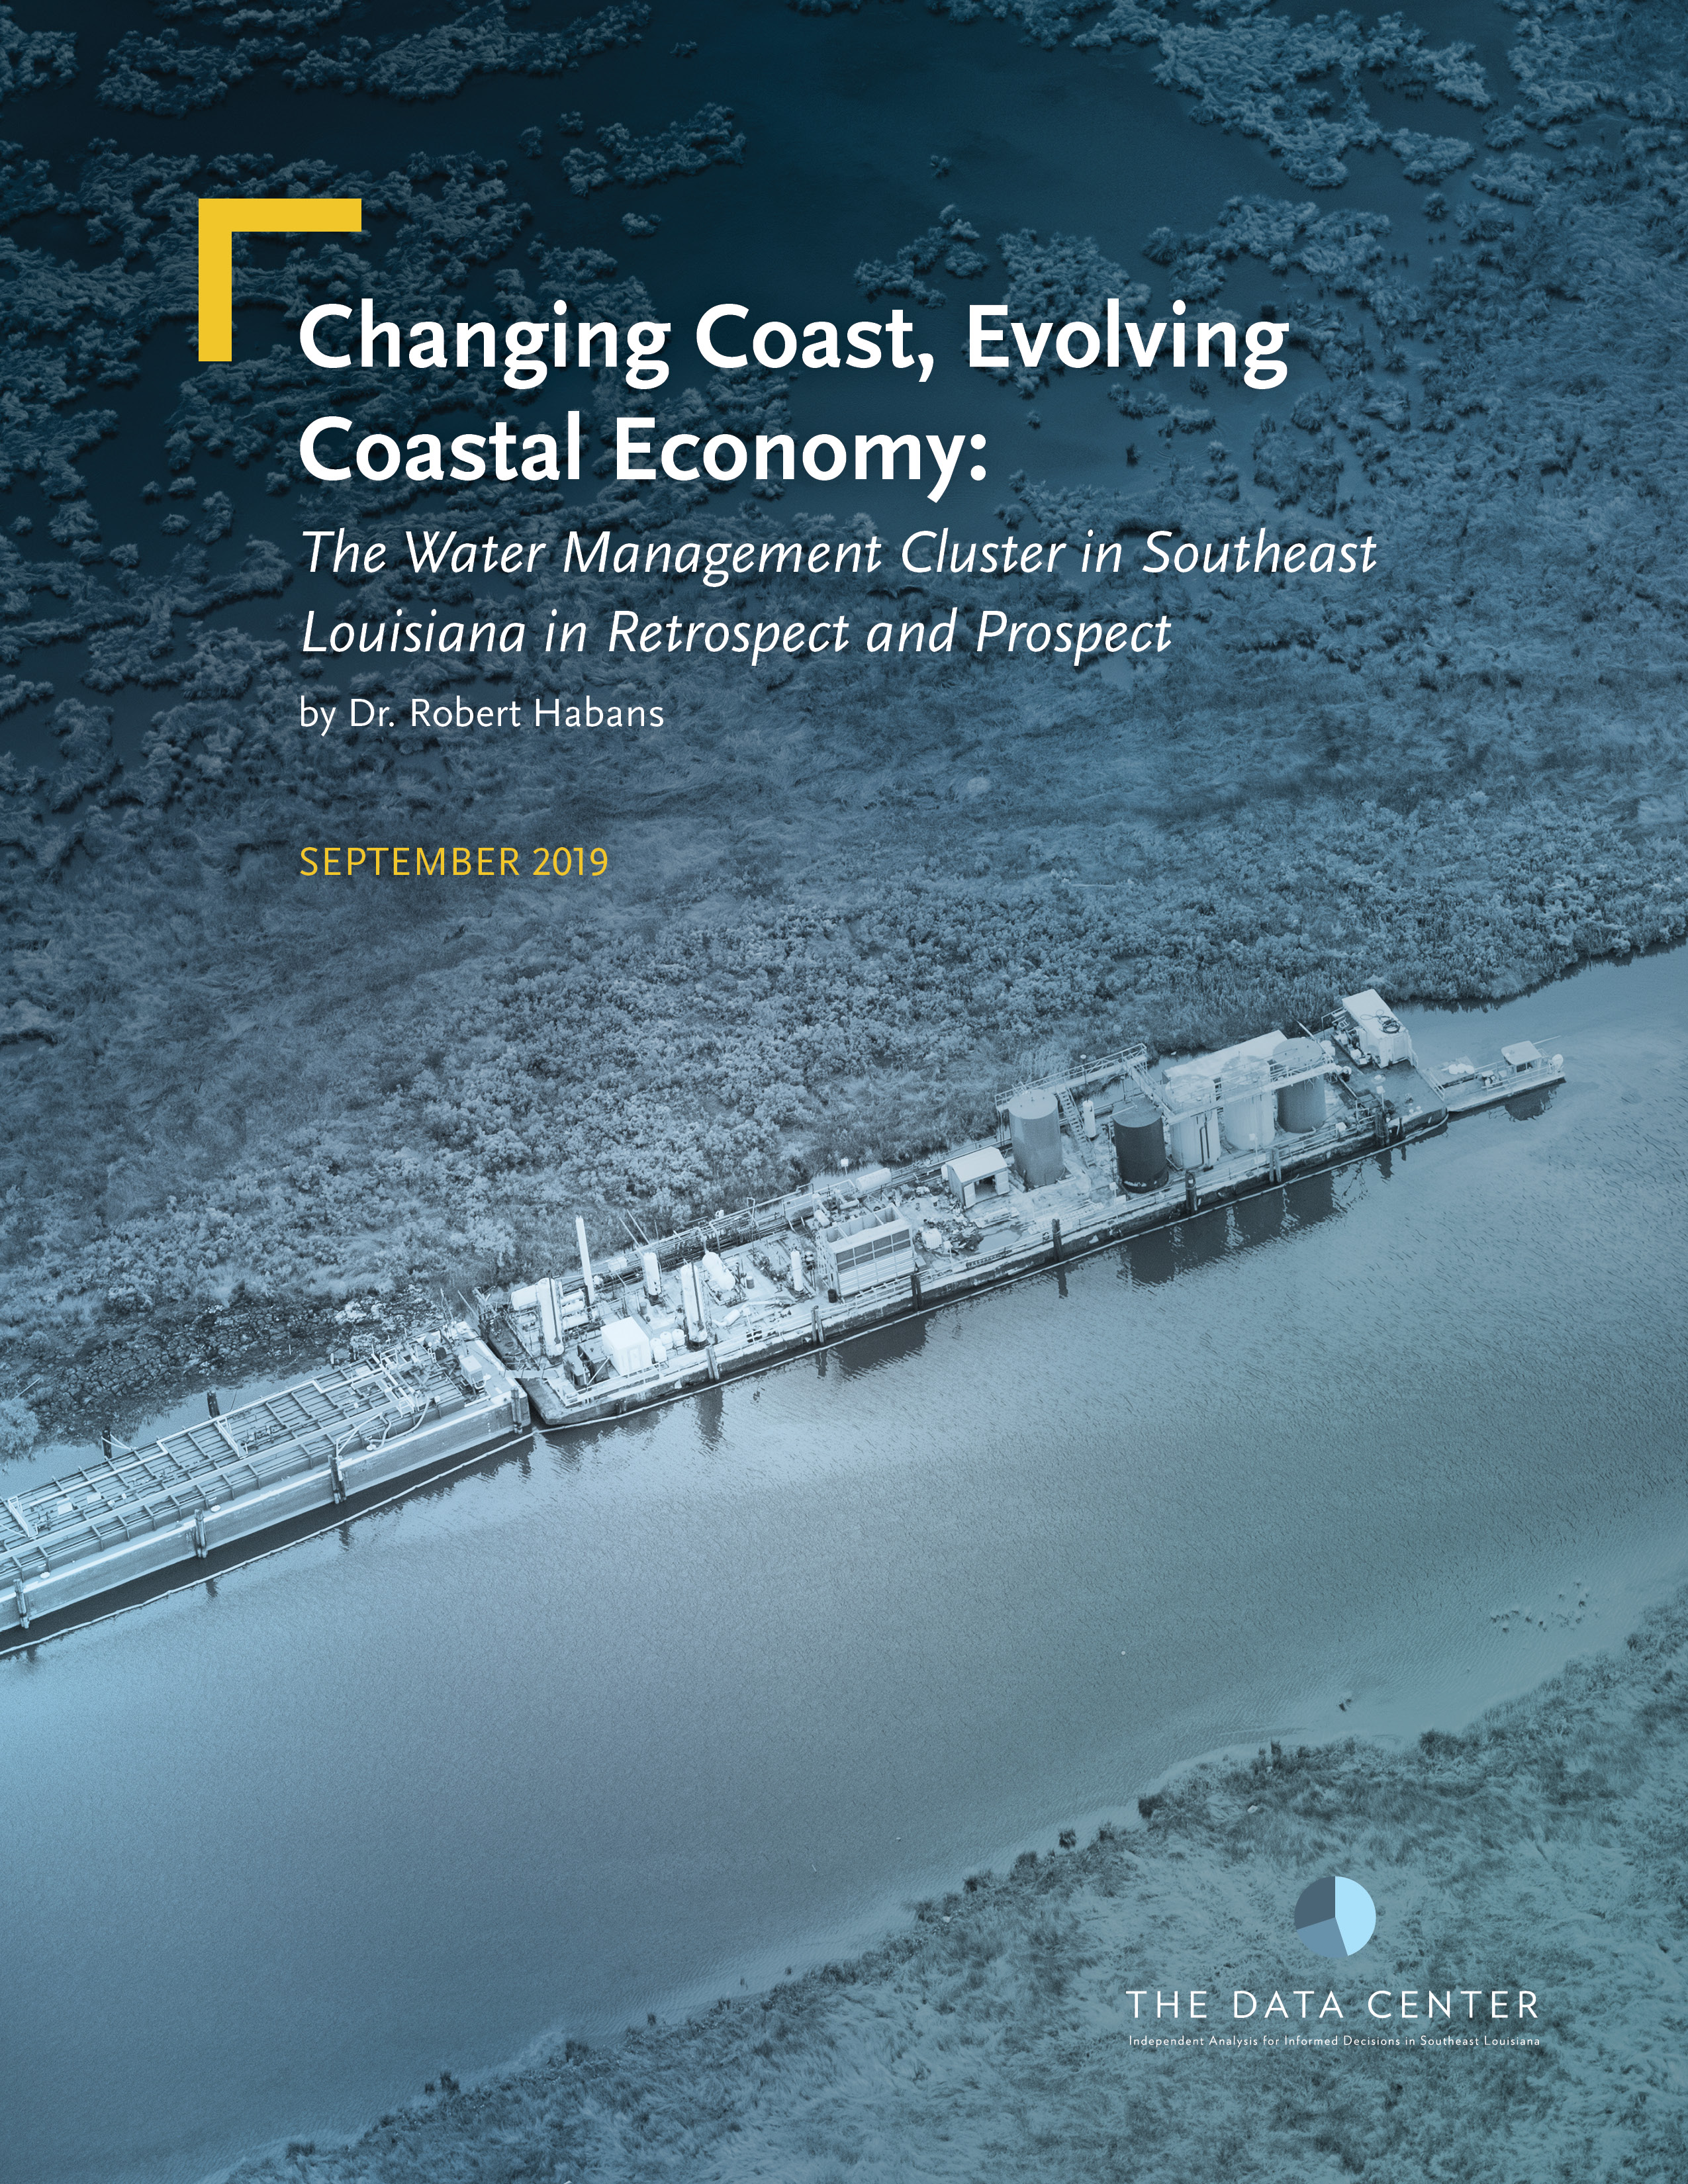 Changing coast, evolving coastal economy: The water management cluster in Southeast Louisiana in retrospect and prospect